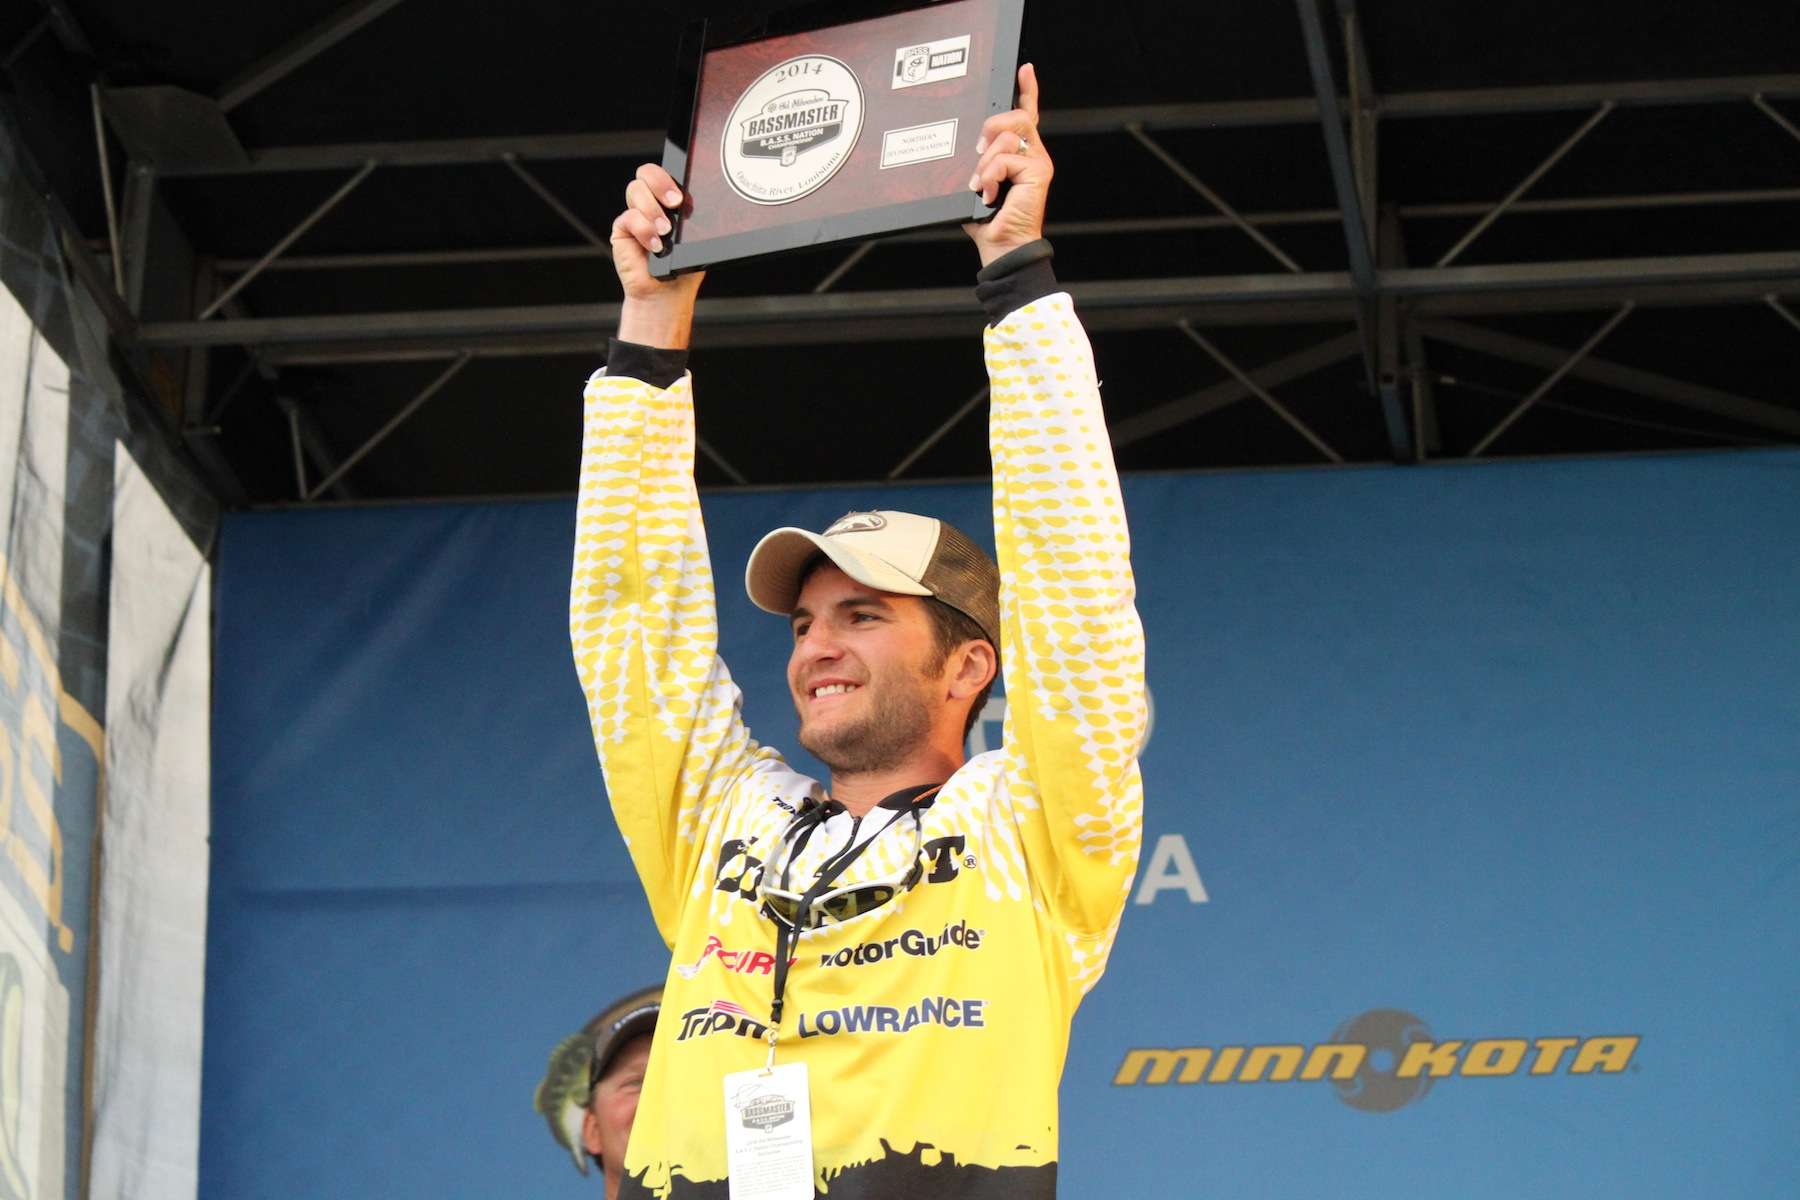 Troy Diede wins the Northern Division and will represent the North in the 2015 Bassmaster Classic. 